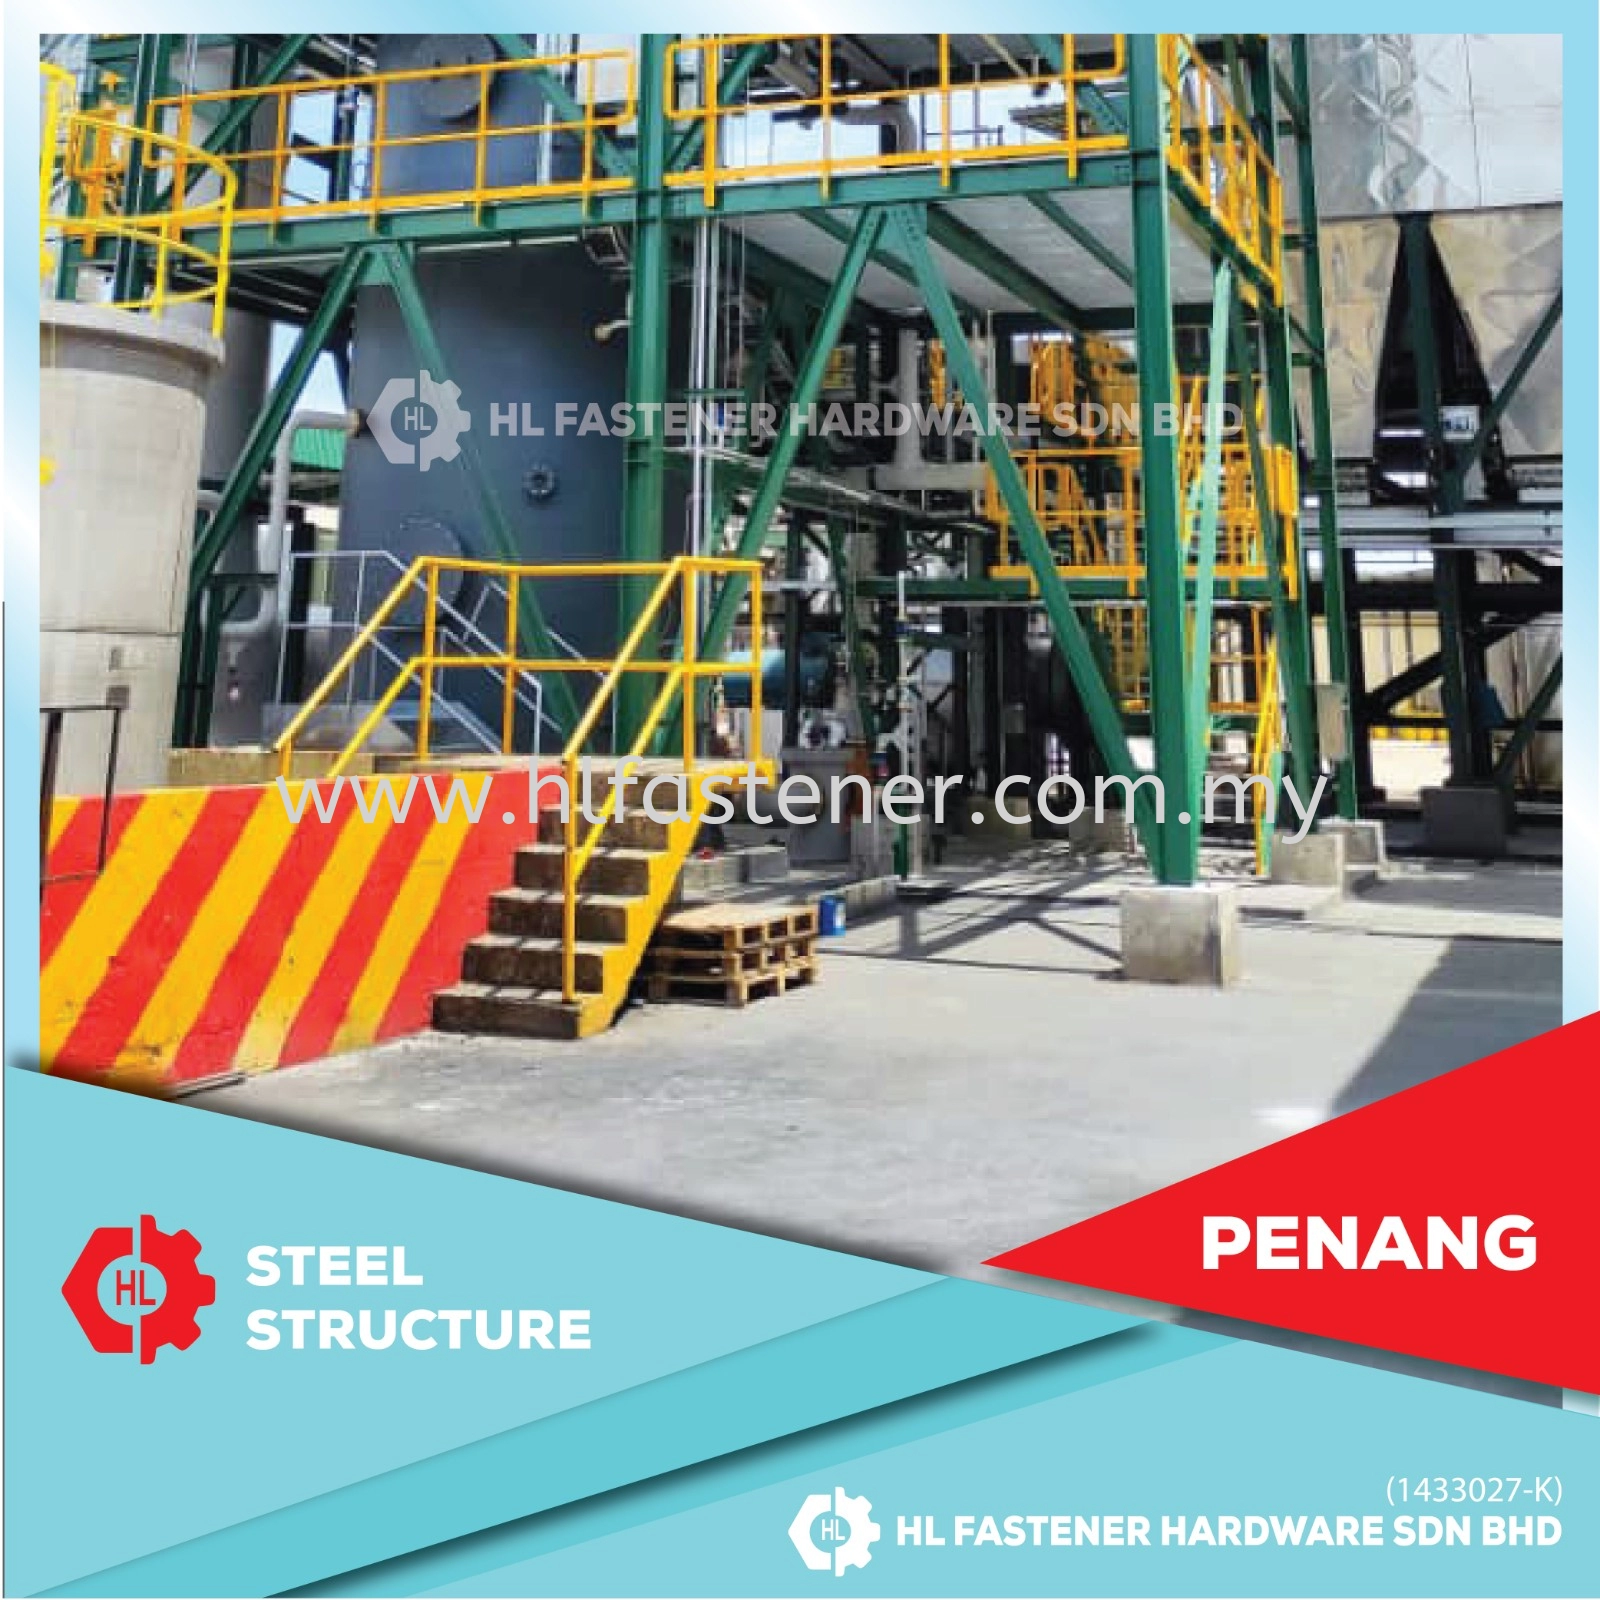 PENANG STEEL STRUCTURE FASTENER SUPPLY